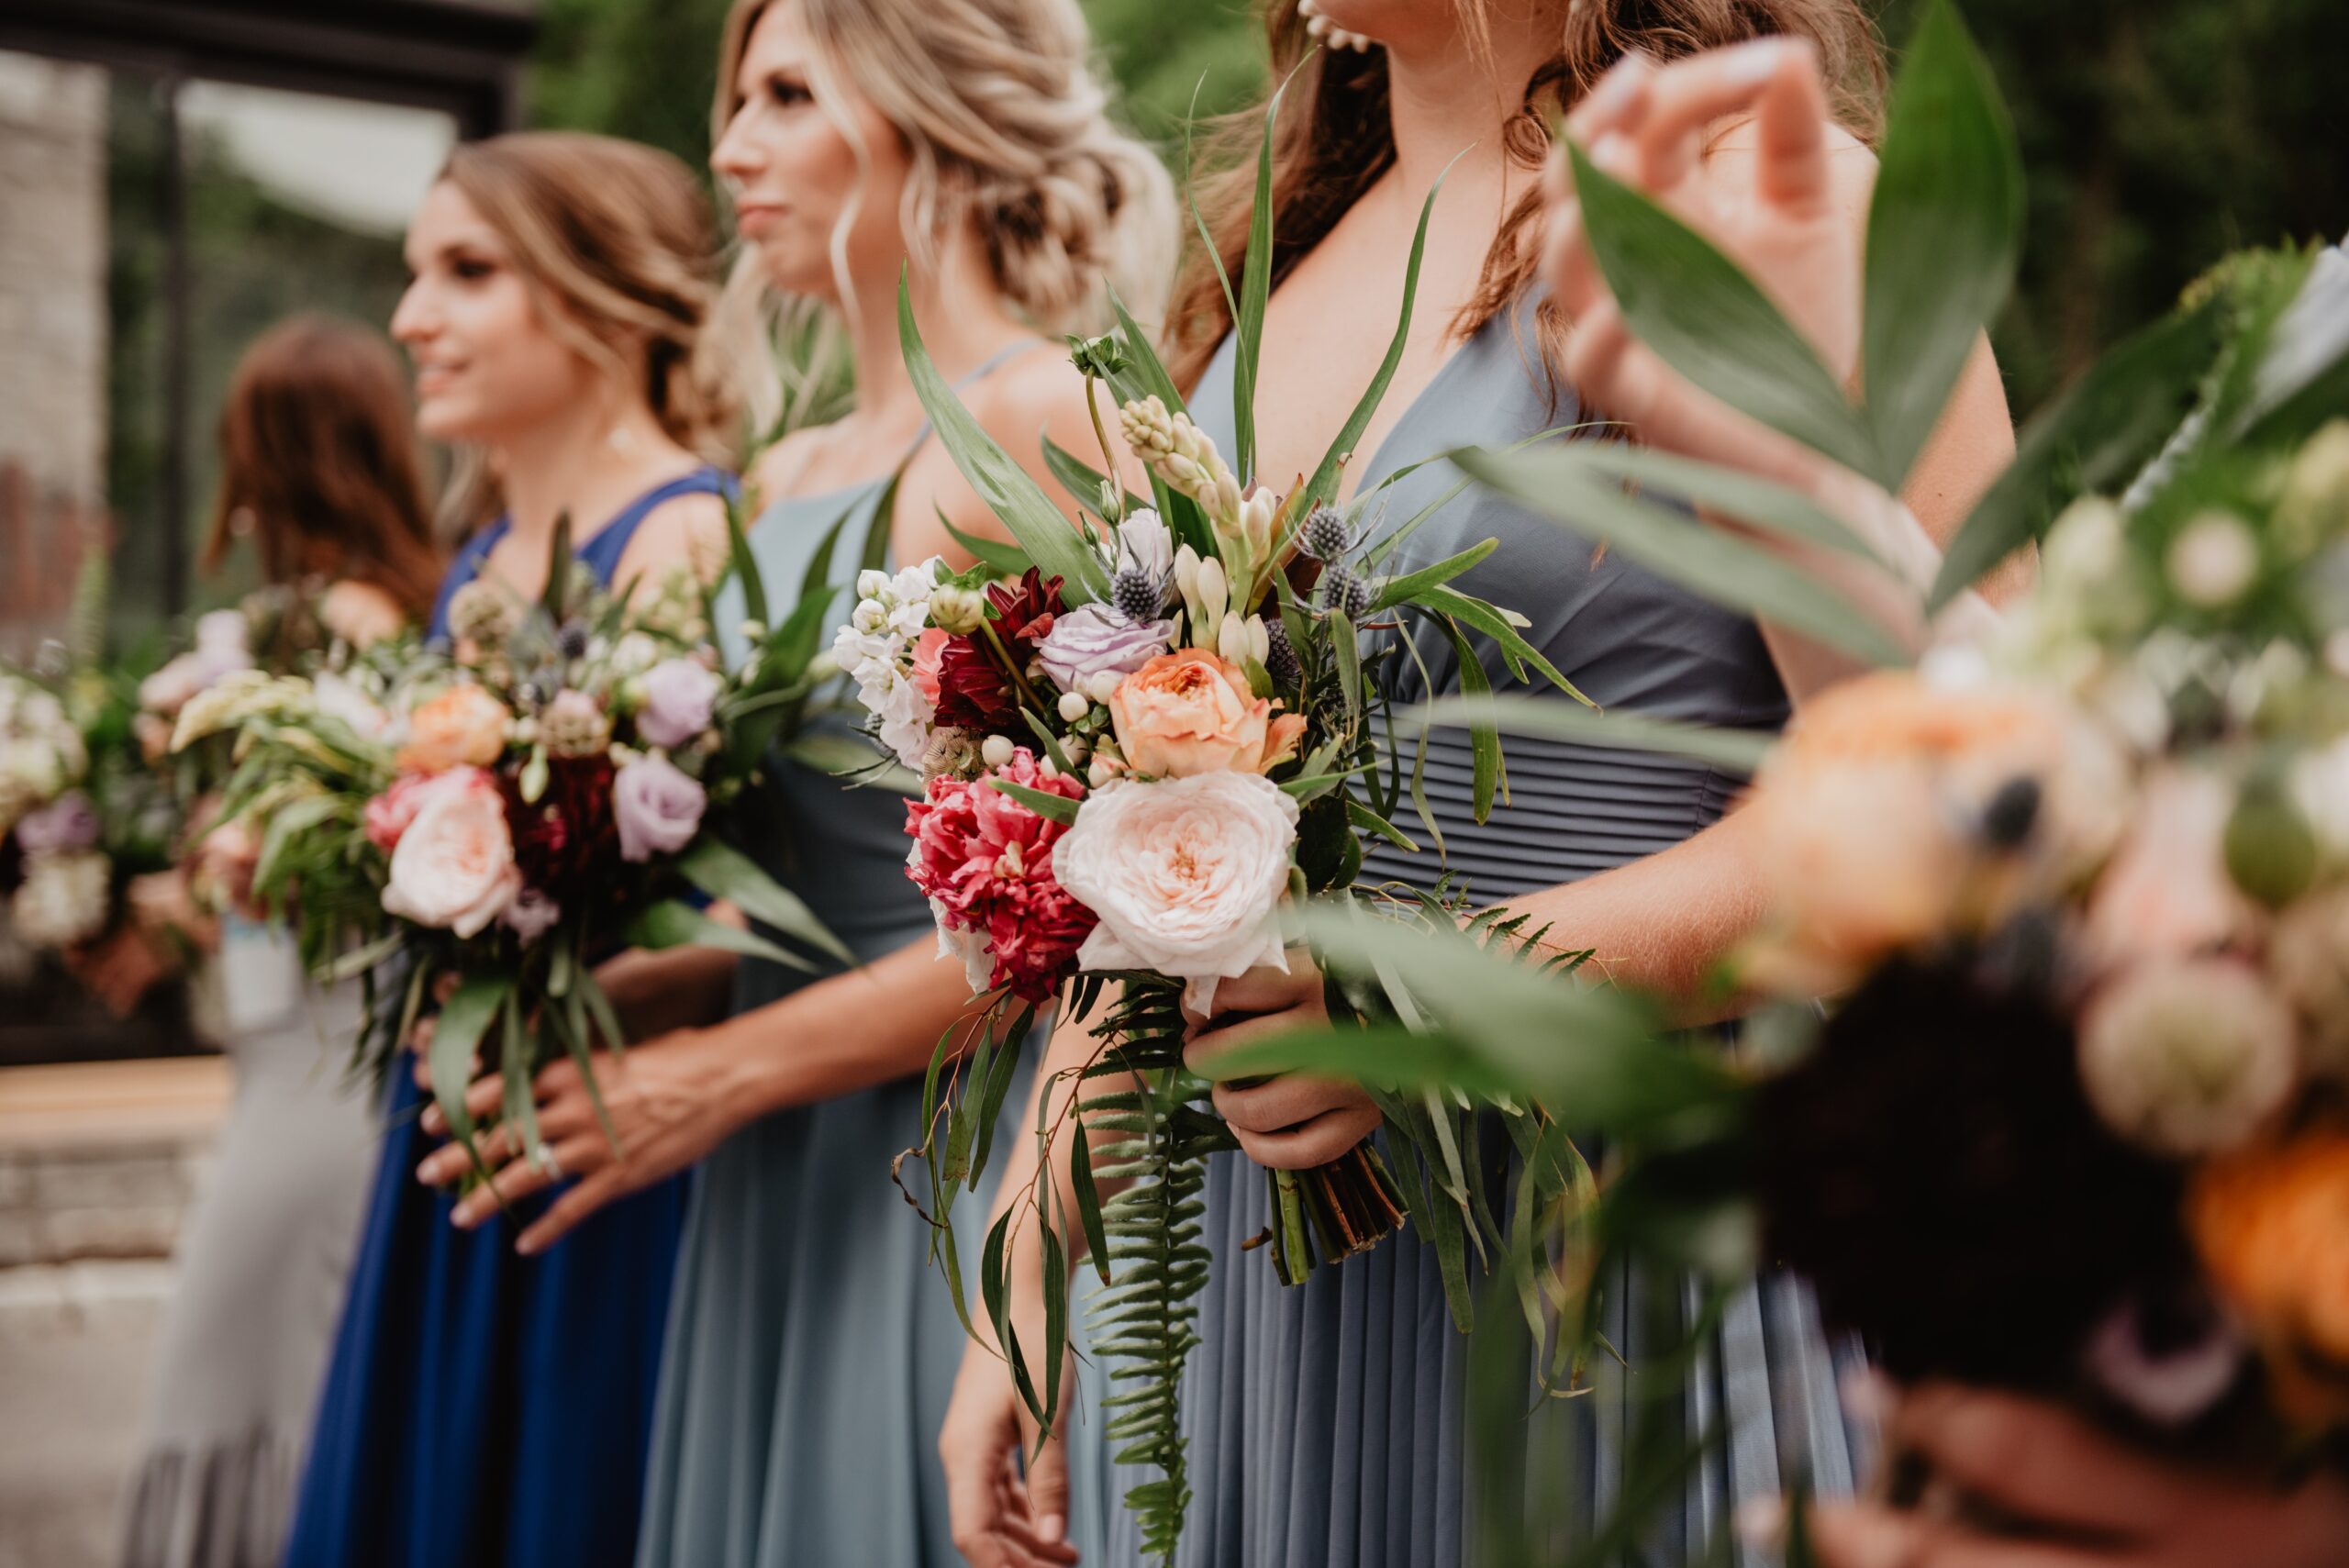 Bridesmaids Duties: What Every Bridesmaid Should Know